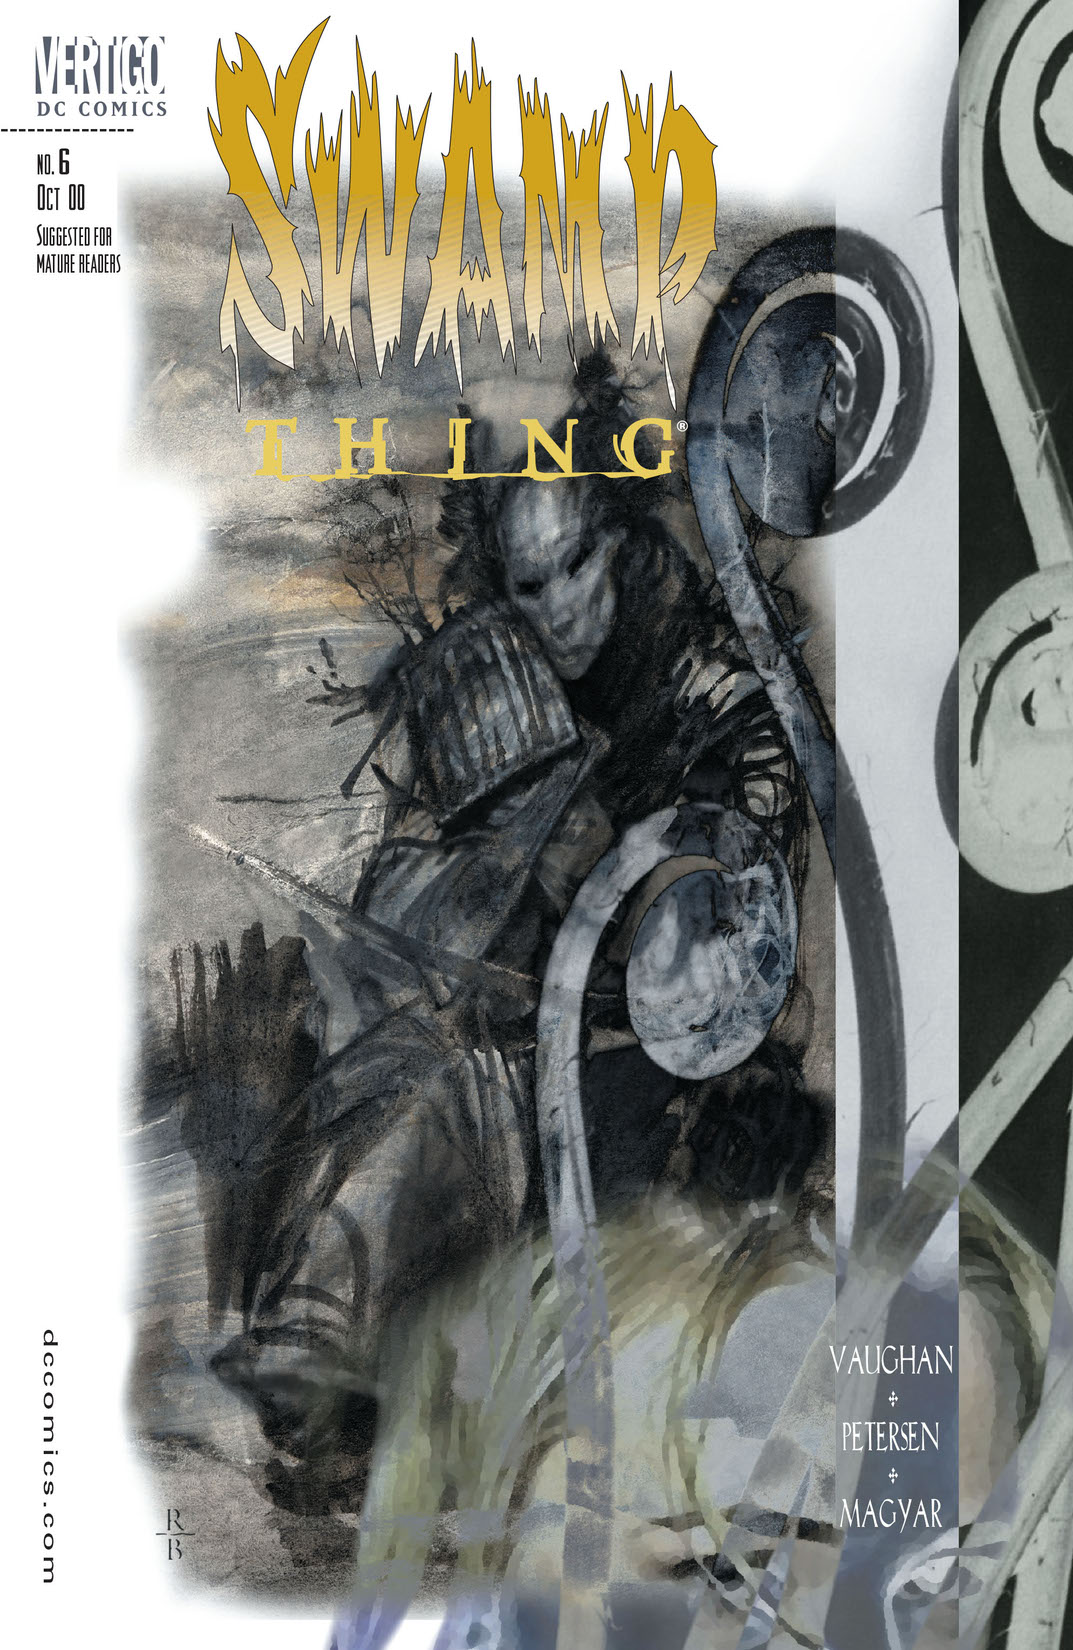 Swamp Thing (2000-) #6 preview images